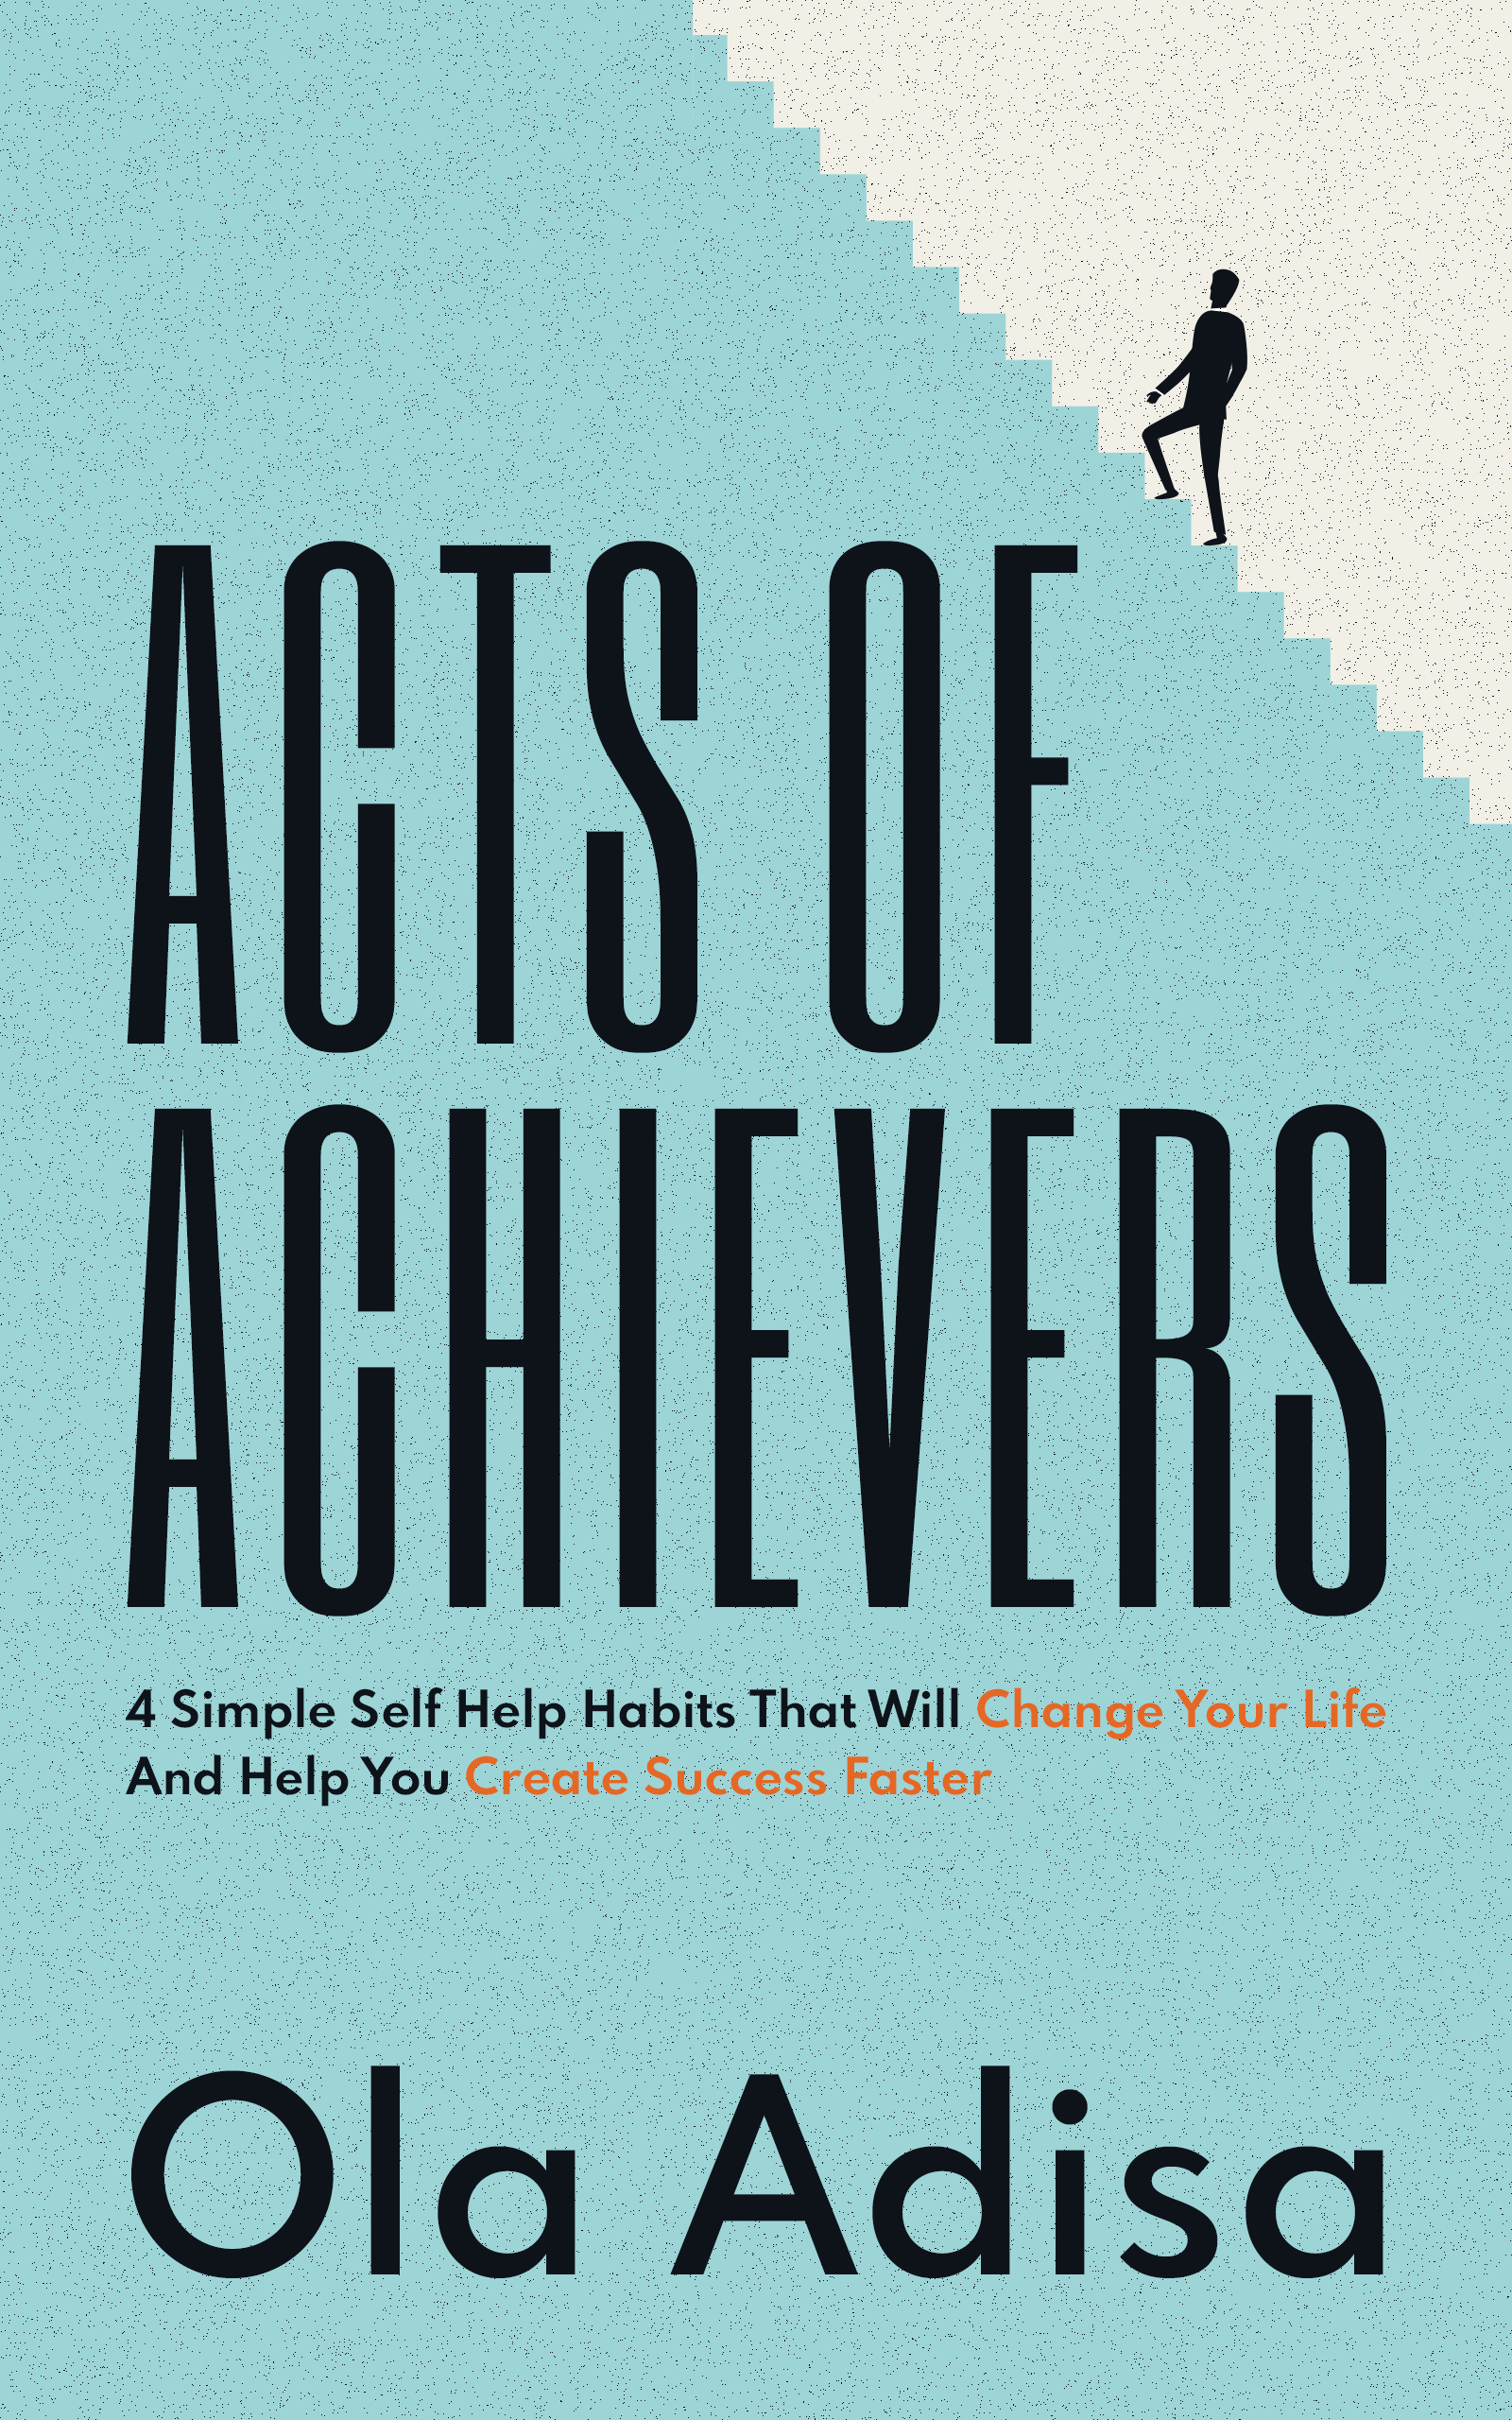 Act of Achievers - A Book on Self Help Habits That Can Significantly Bring Changes in Life